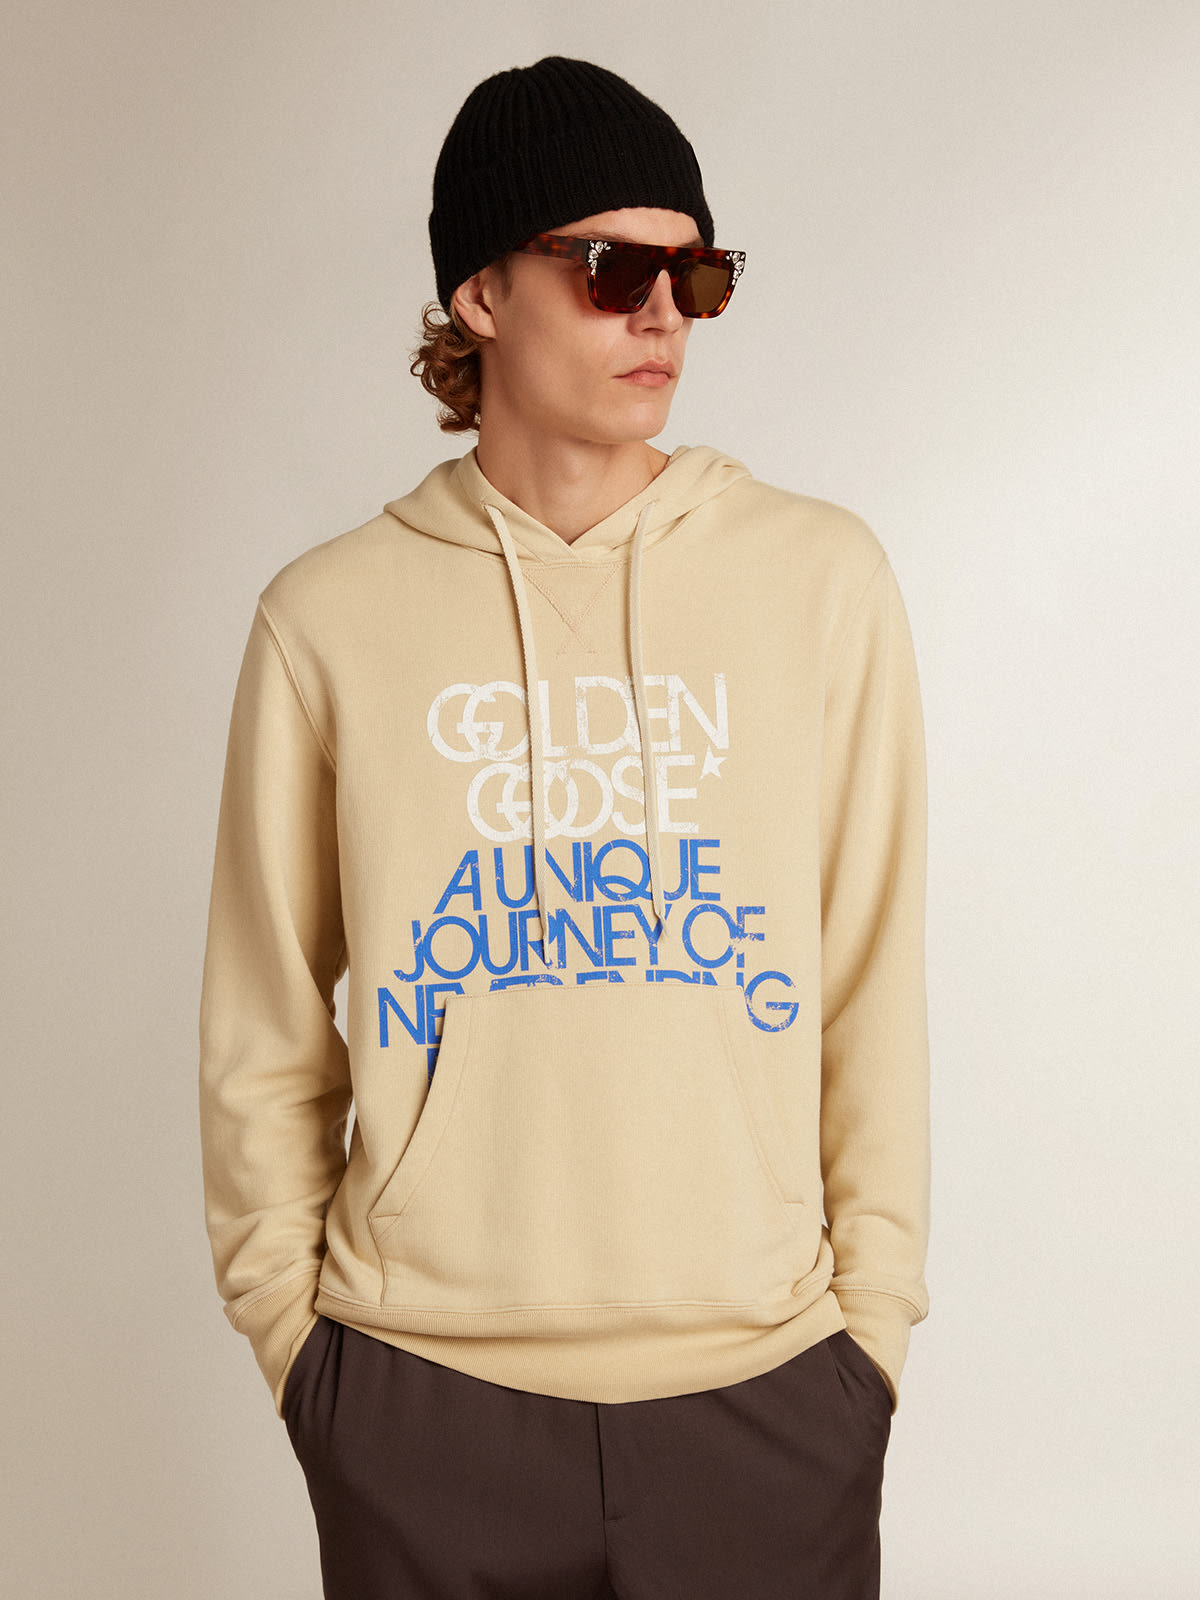 Golden Goose - Marzipan-colored sweatshirt with lettering on the front in 